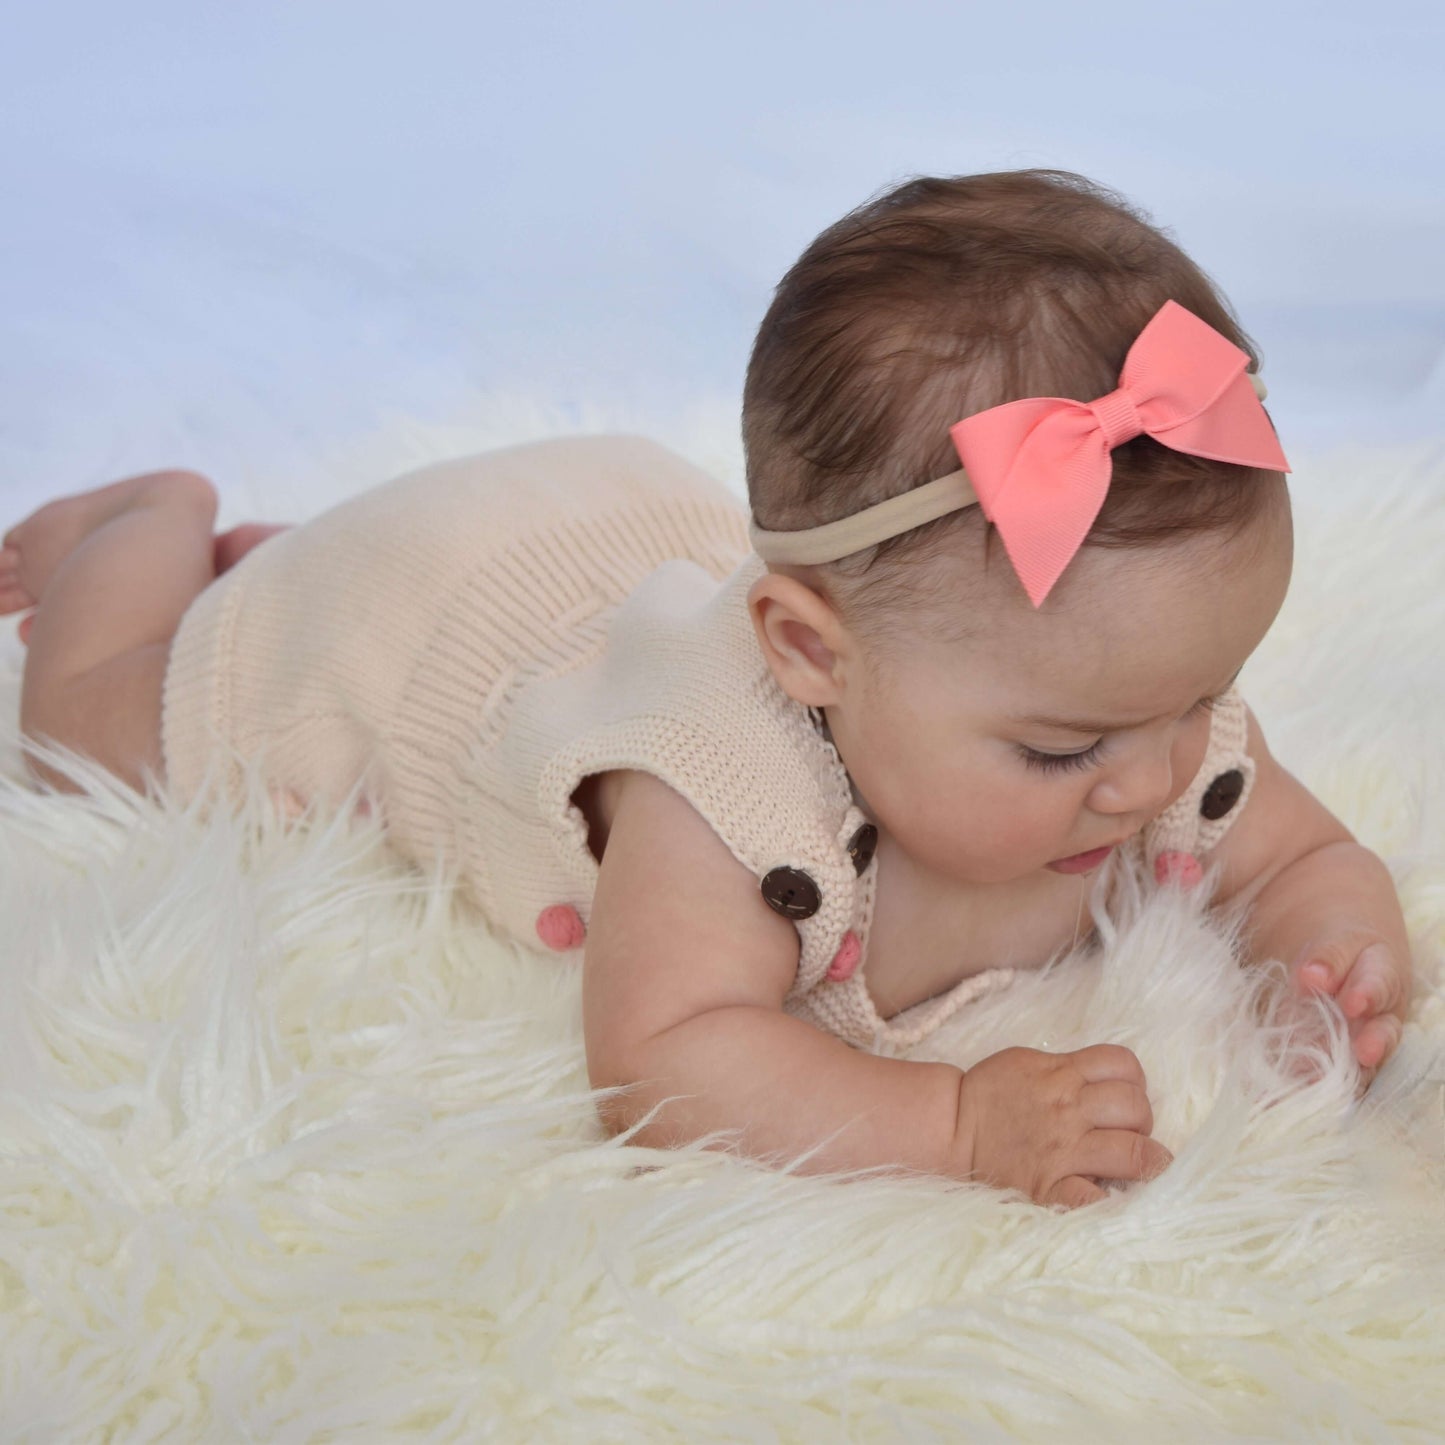 Baby wearing a pink grosgrain bow headband while lying on a fluffy white rug